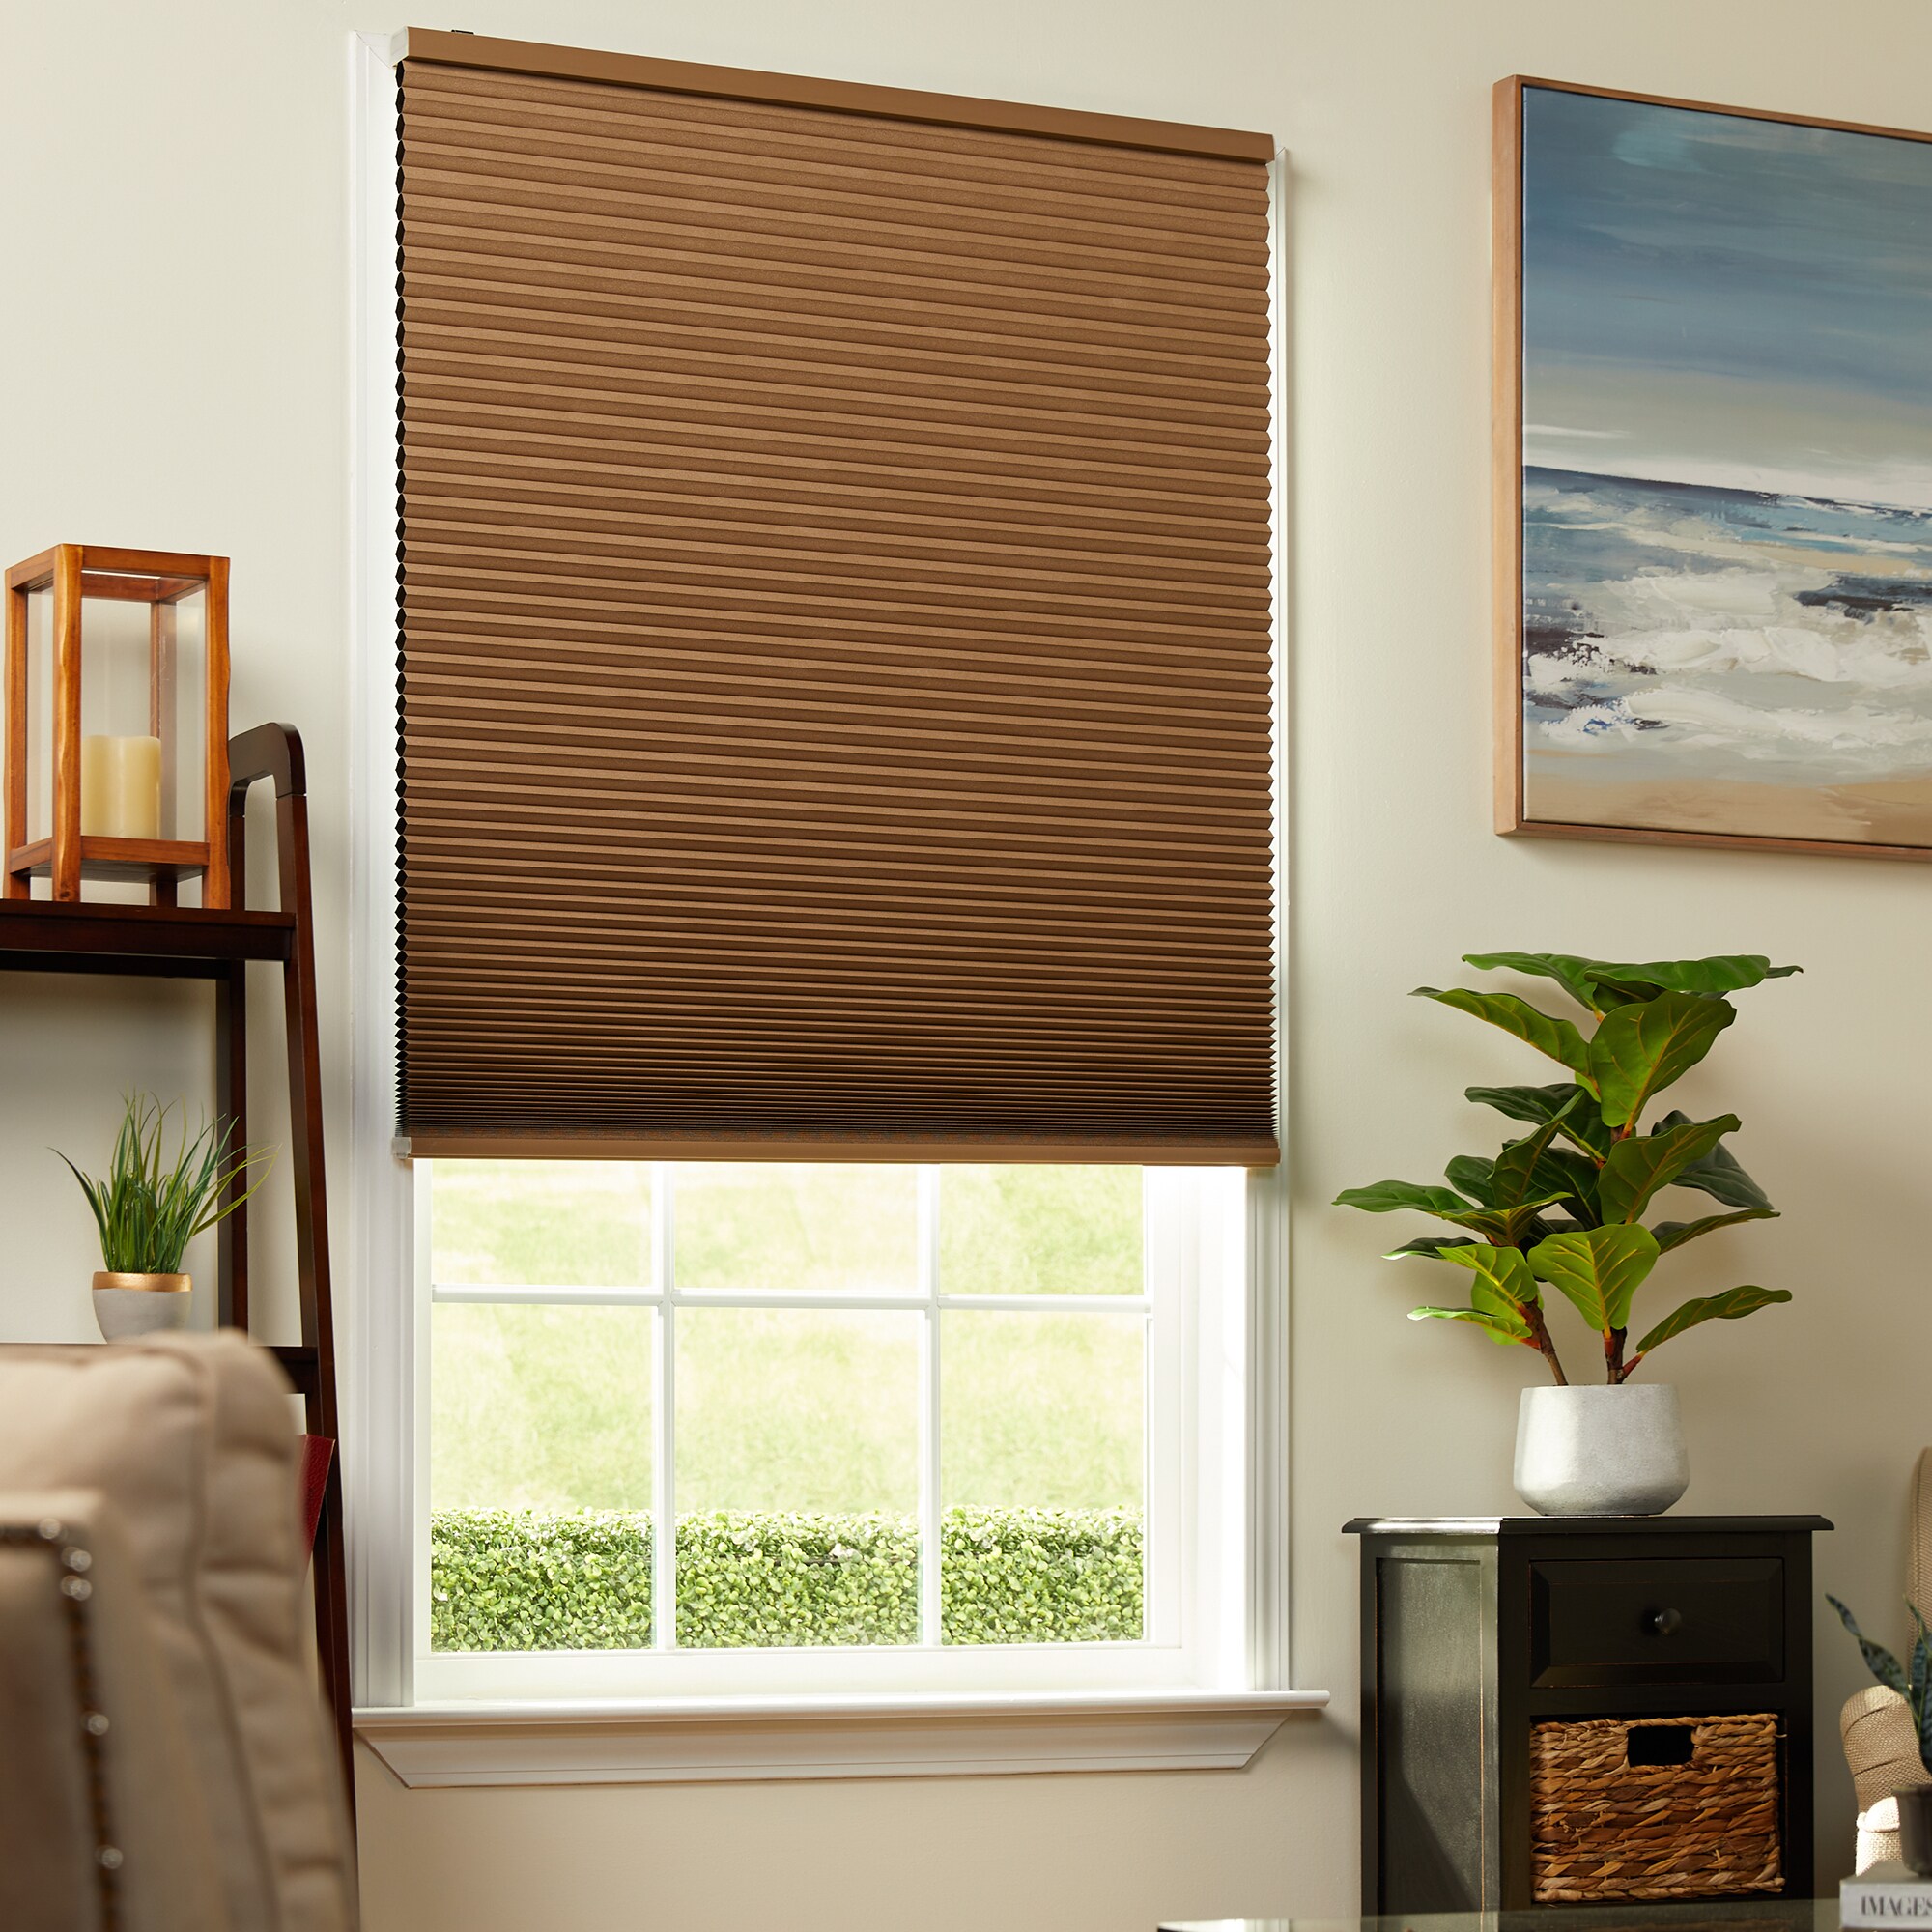 Grey, 25 W X 50 H Light Filtering + Black Out Langla-Shades 2 in 1 Cordless Honeycomb Cellular Shades Window Blinds 